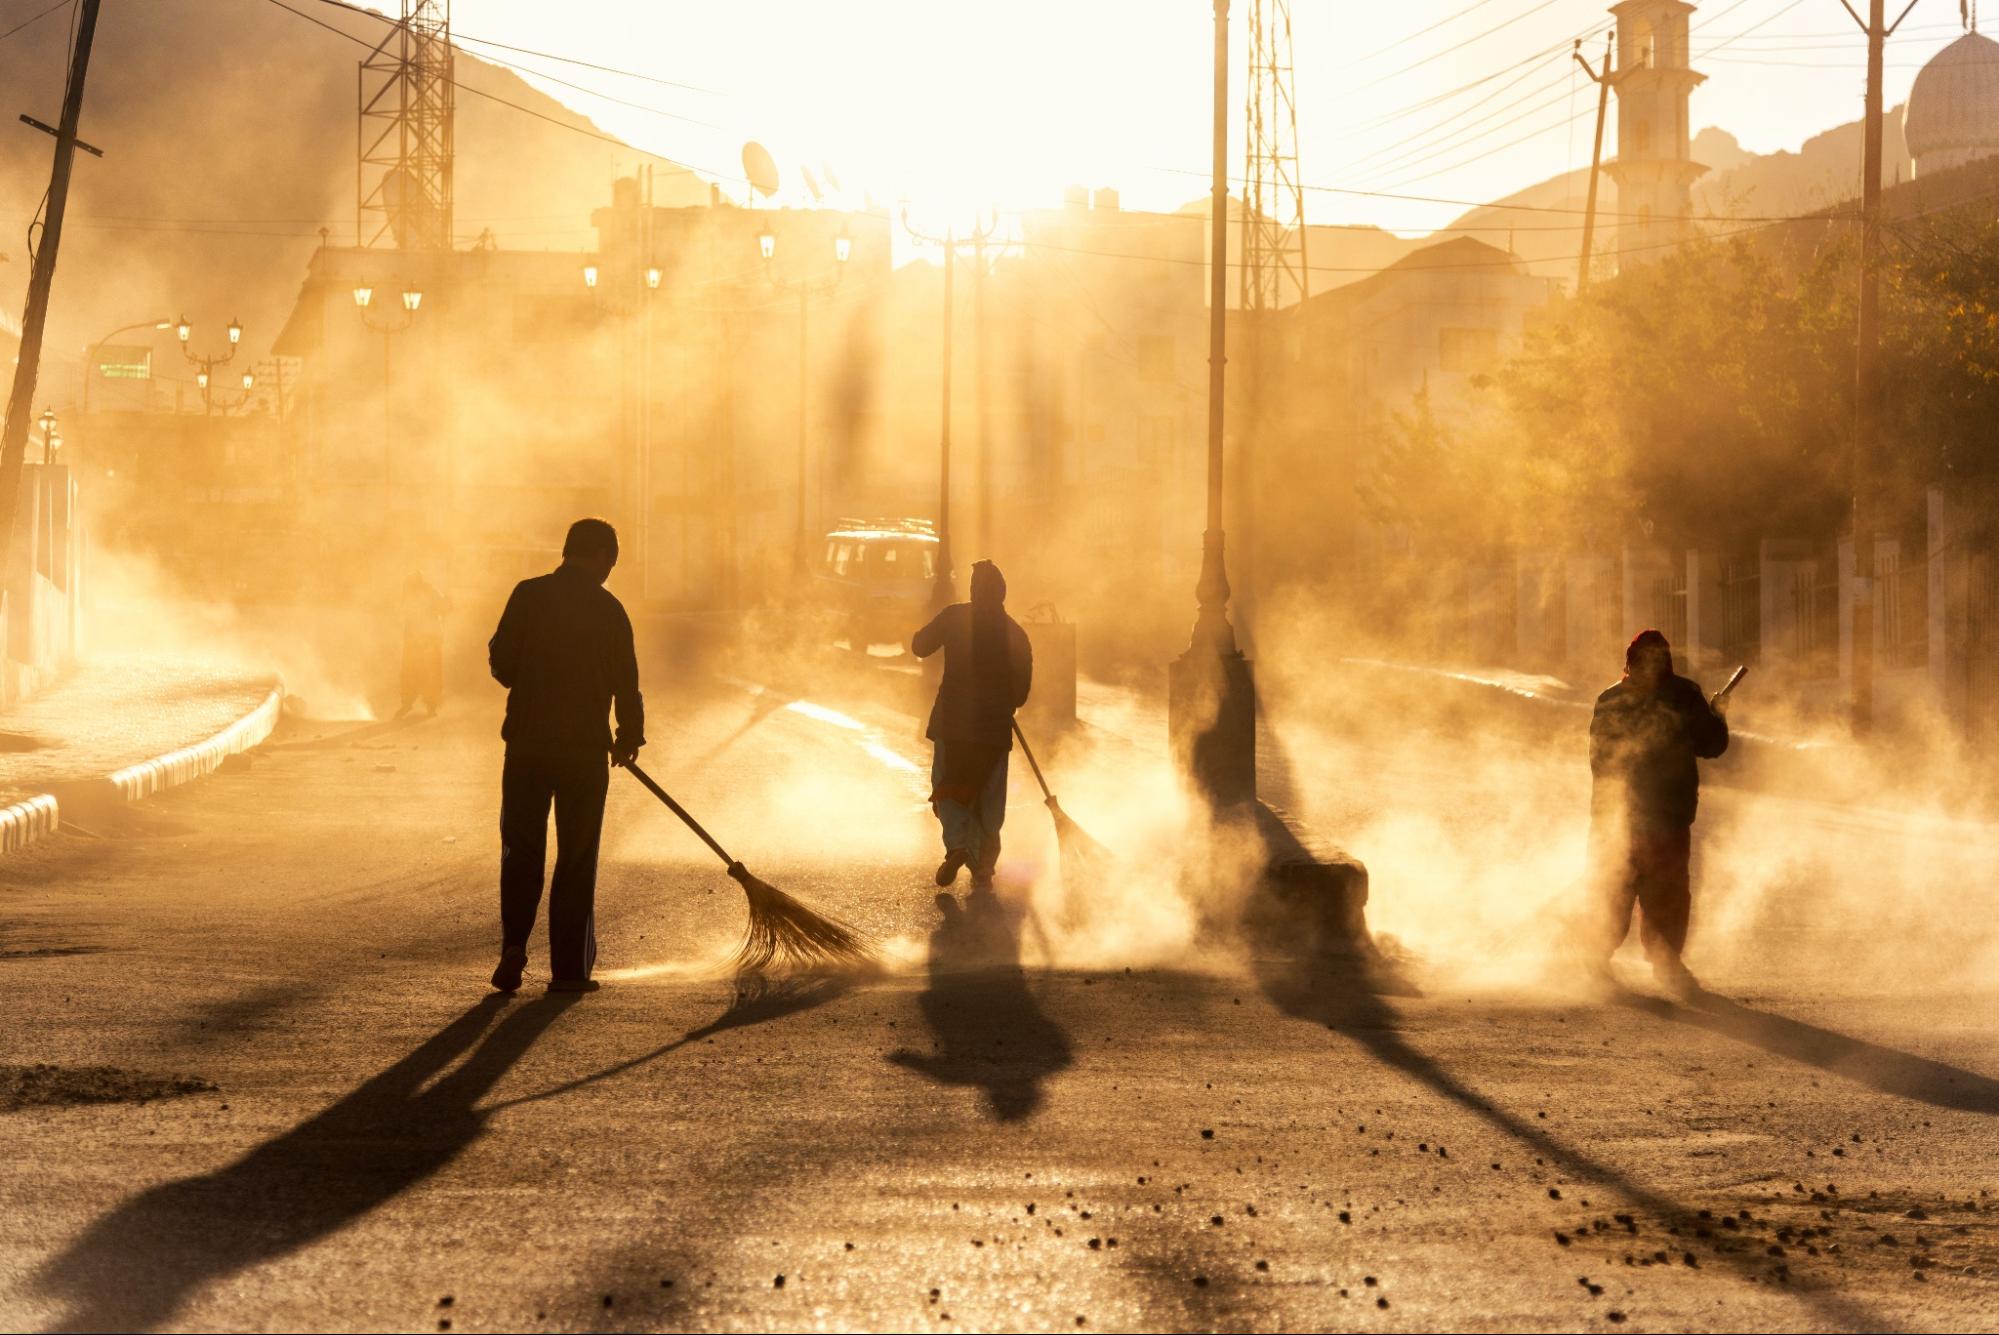 Image of four shadowy figures sweeping, cast in a golden light.